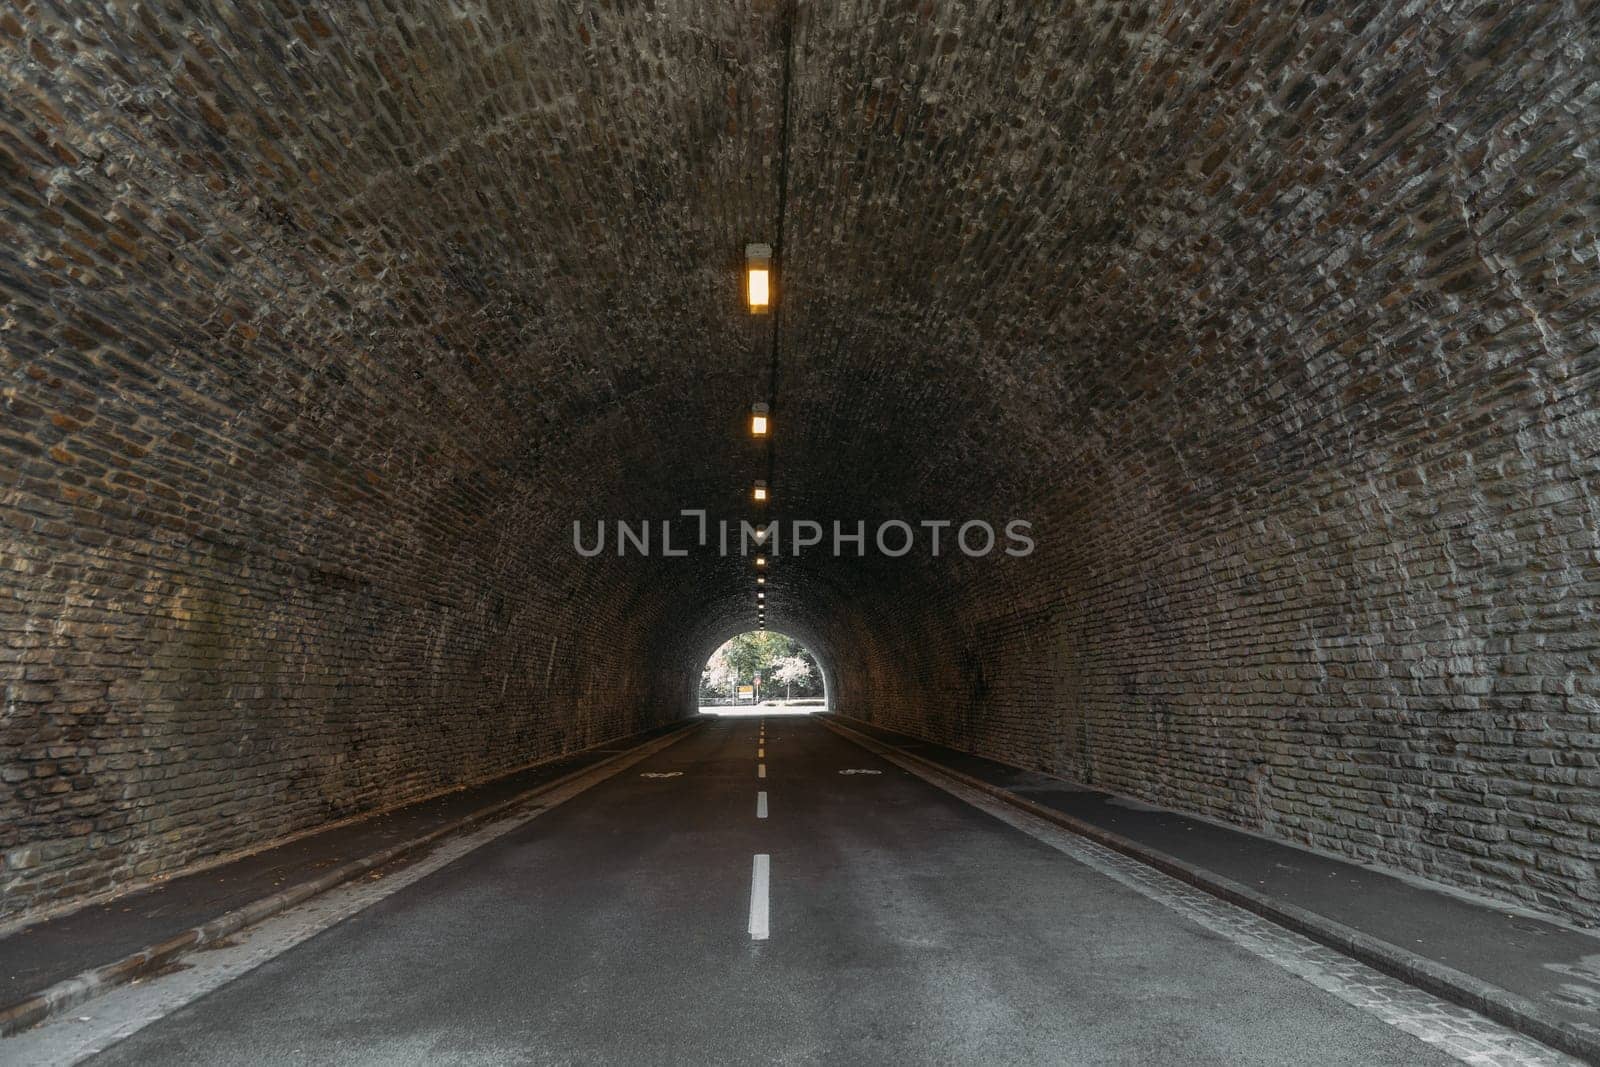 Infrastructure auto tunnel illuminated by lights at end by apavlin